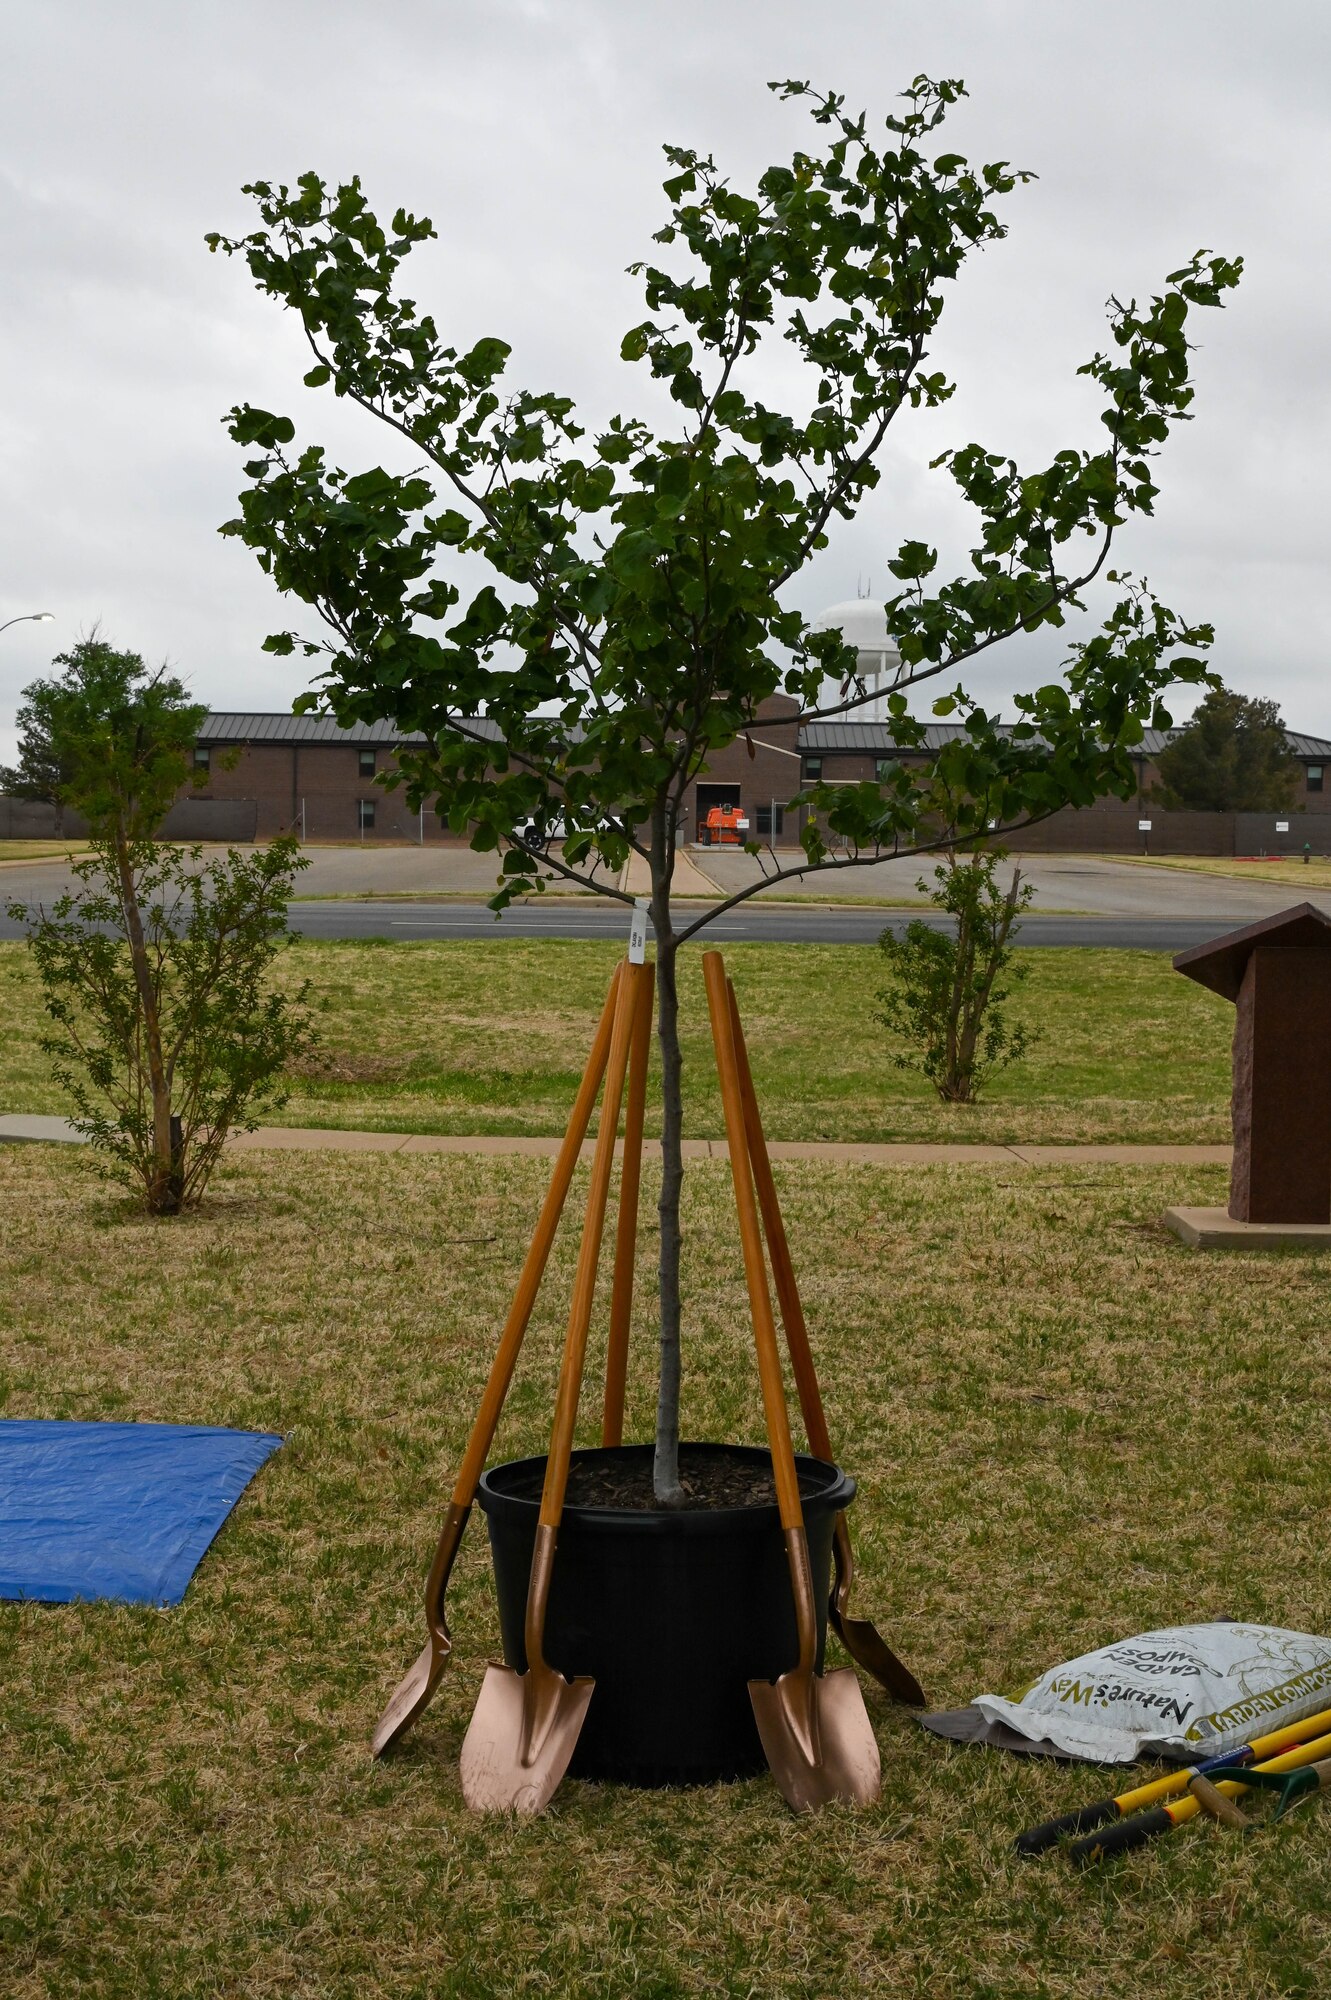 The Oklahoma state tree, an eastern redbud, sits at Wings of Freedom park before a groundbreaking ceremony at Altus Air Force Base, Oklahoma, May 2, 2022. The eastern redbud typically grows 20 to 30 feet tall with a 26 to 33-foot spread. (U.S. Air Force photo by Senior Airman Kayla Christenson)